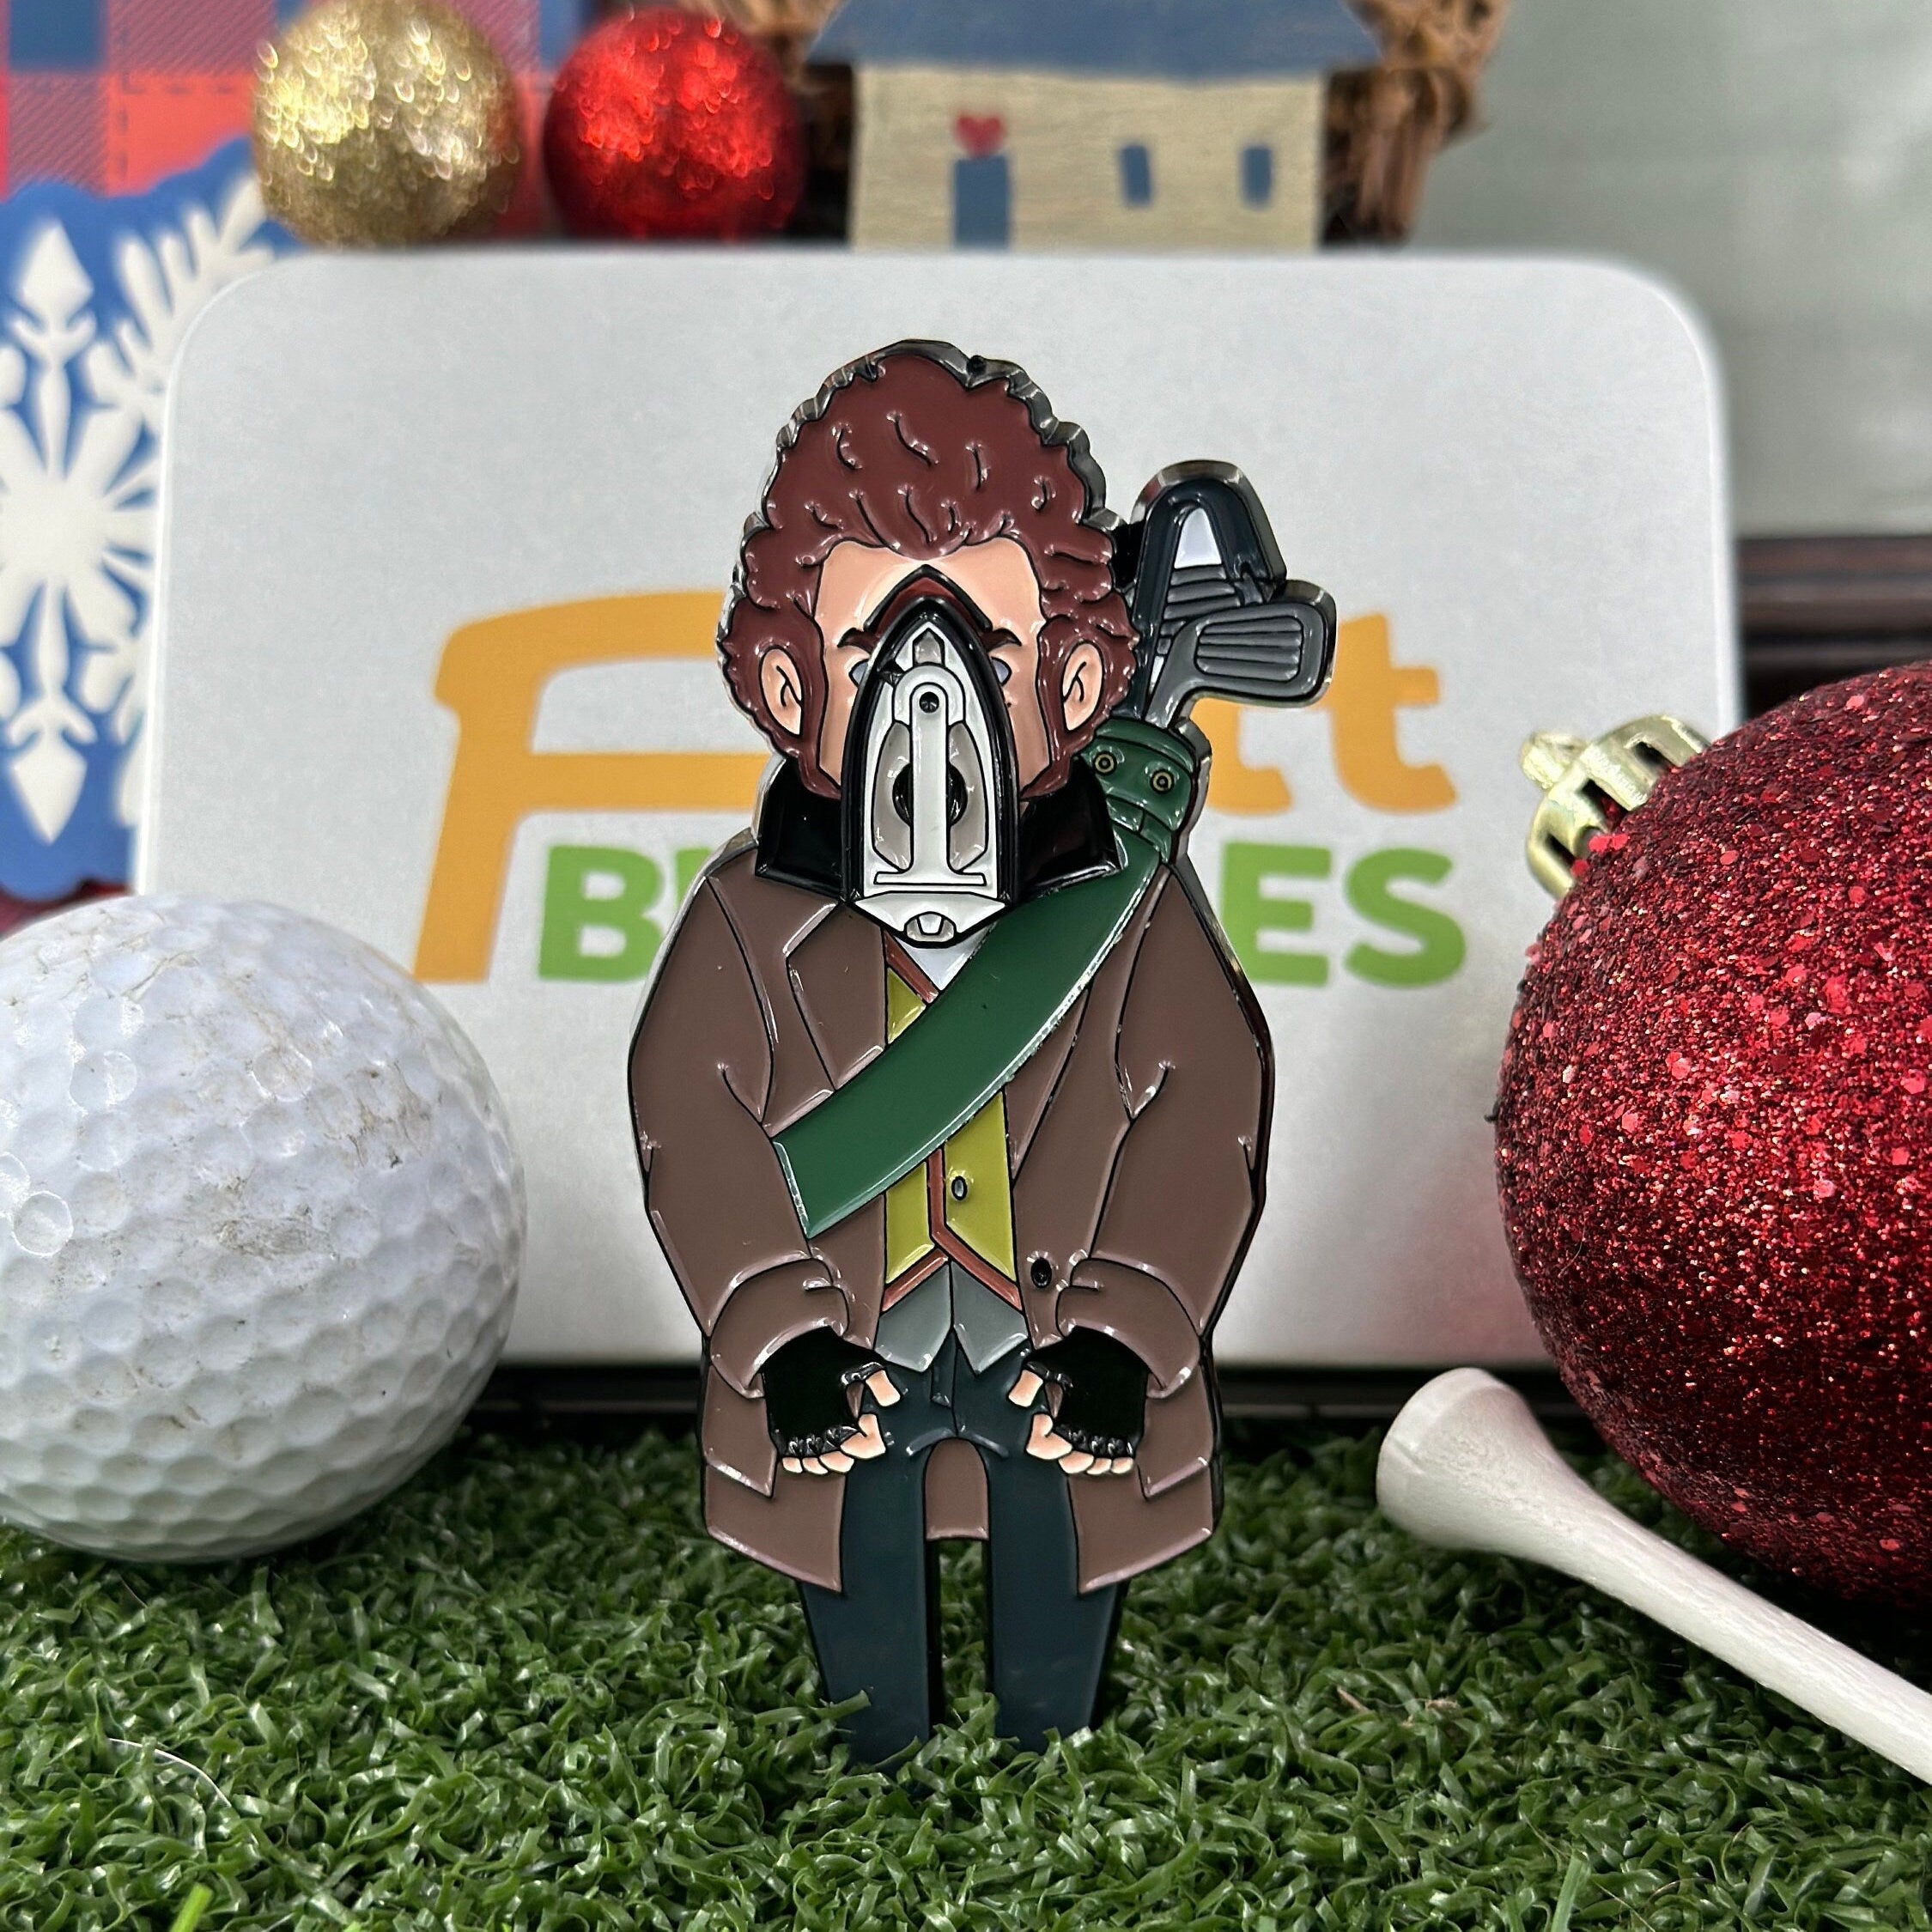 PuttBuddies™ - Holiday Edition: Home Along Ball Marker and Divot Tool Gift Set, Christmas Golf Gift, Unique Golf Accessories